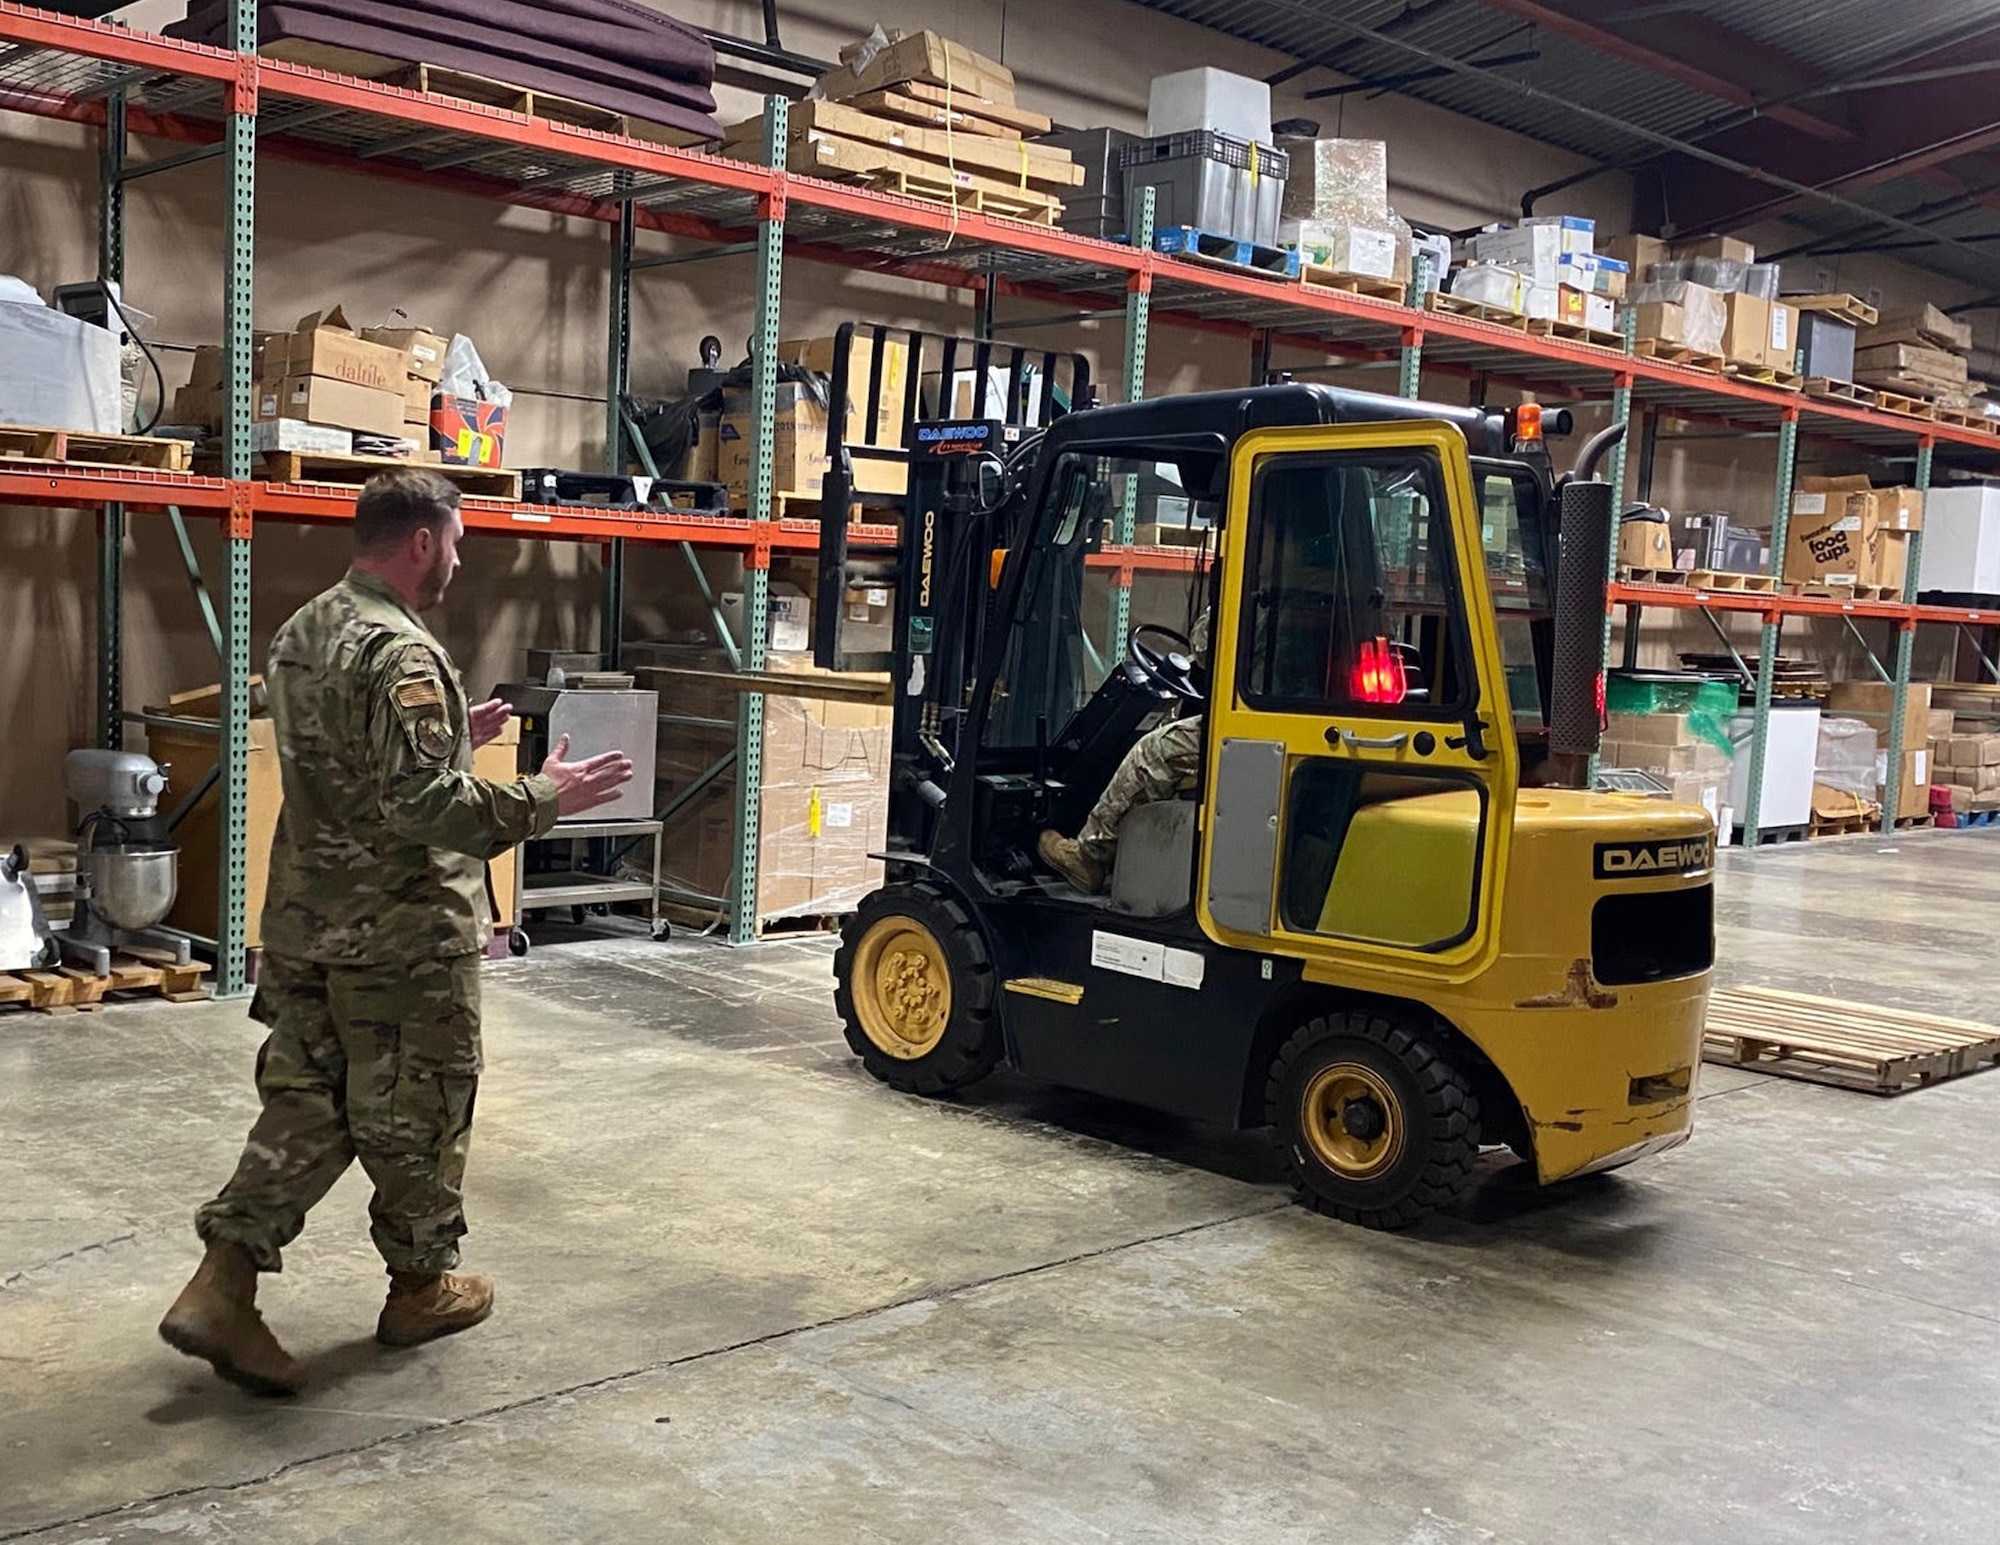 U.S. Air Force Tech. Sgt. Nathan Fuchs, left, gives driving directions to Master Sgt. Esther McRae, 133rd Forces Support Squadron, on how to use the 6K forklift at Joint Base Elmendorf-Richardson, Alaska, July 28, 2023.